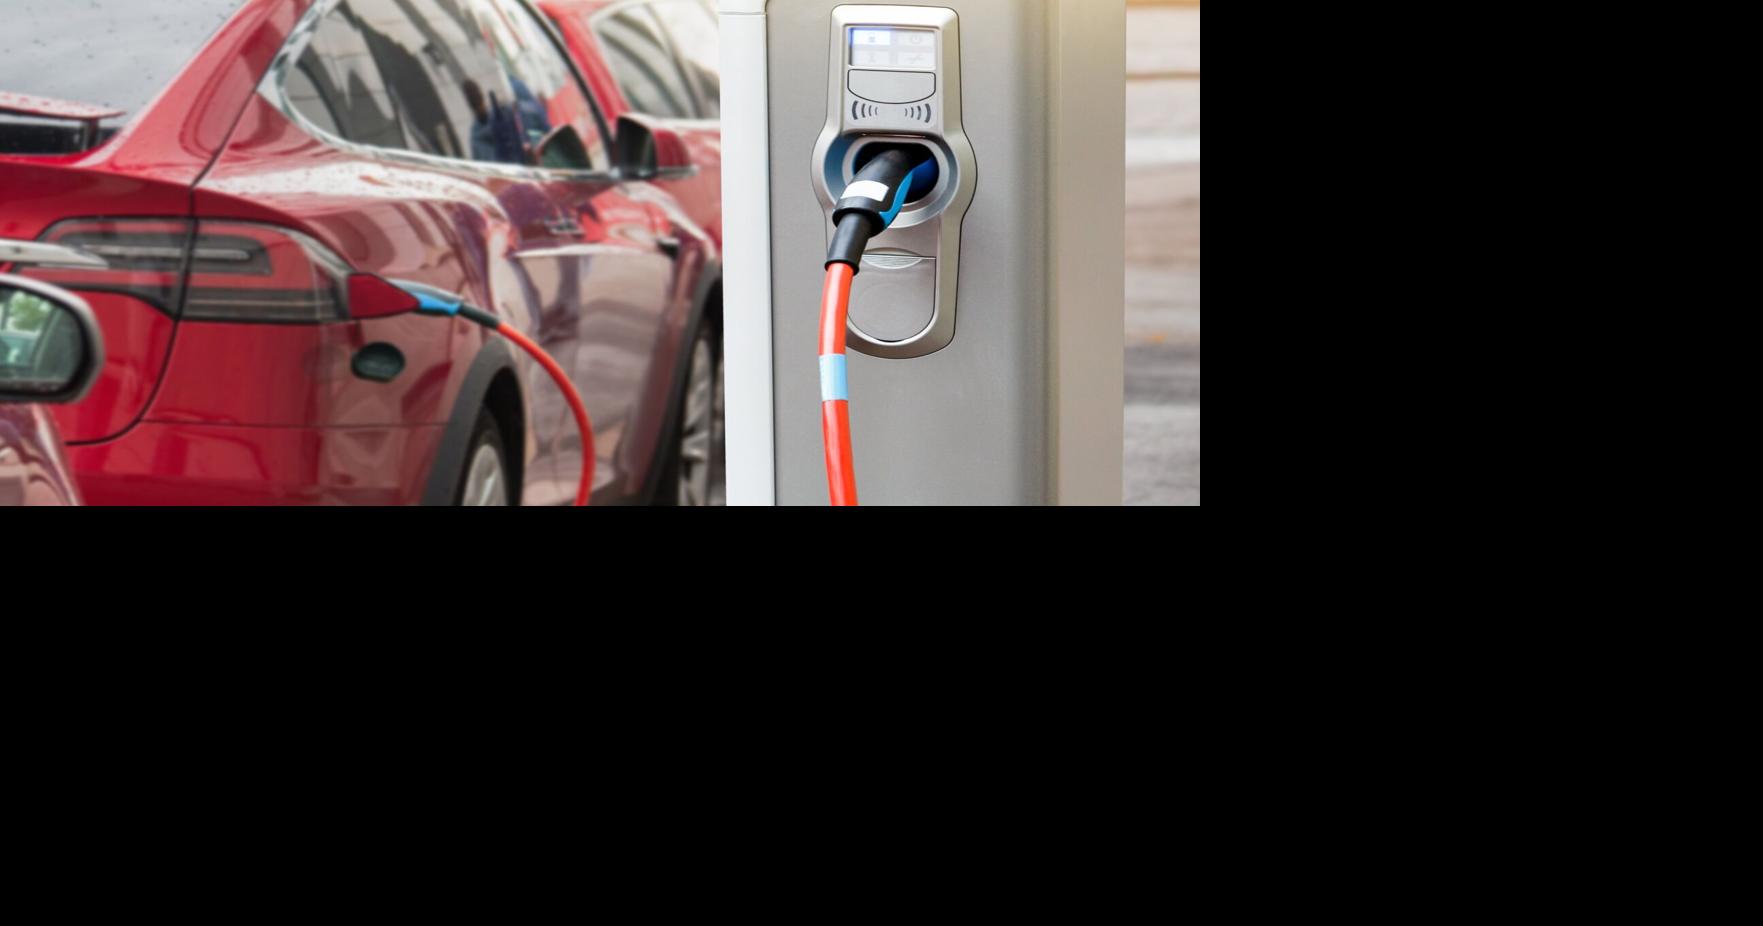 ADOT statewide electric vehicle charger plan OK’d News